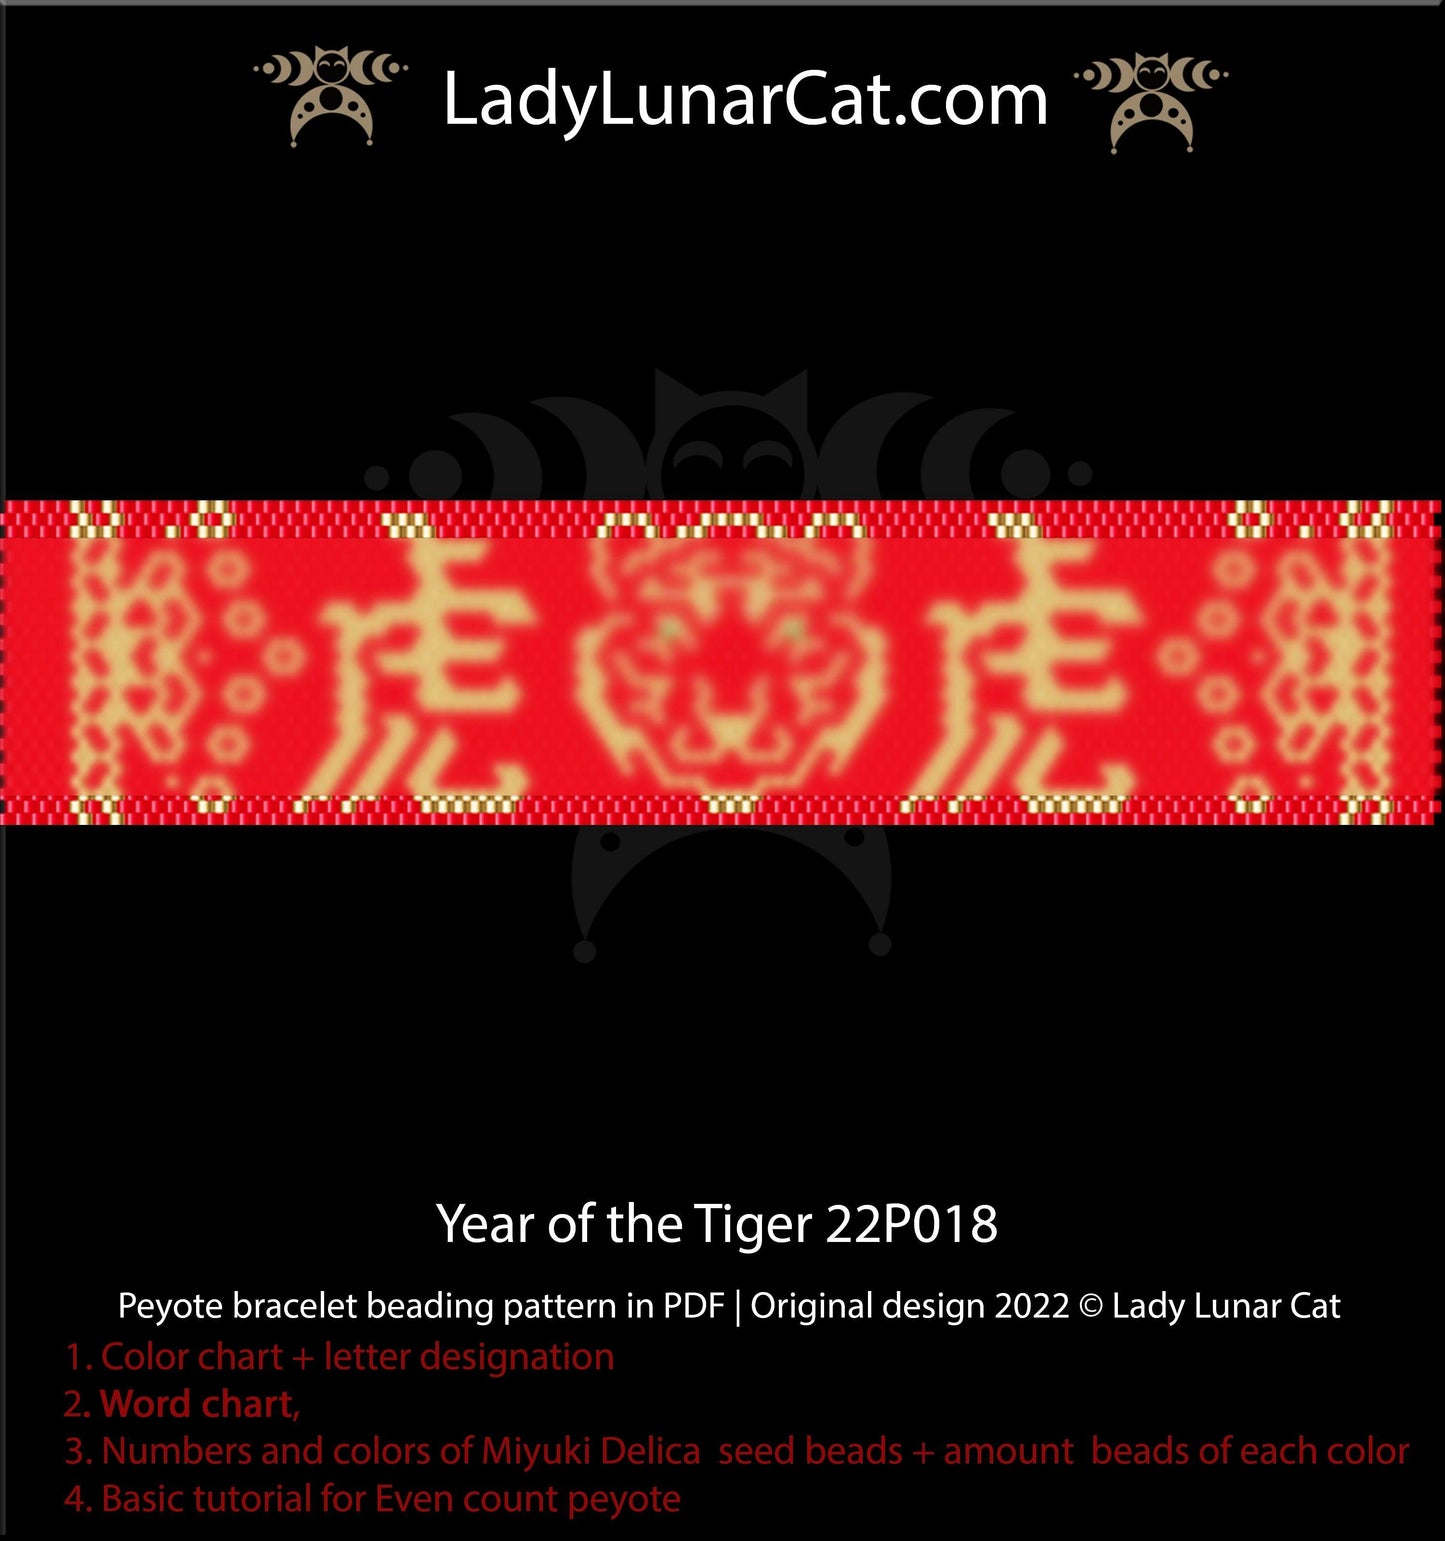 Even count peyote bracelet pattern for beading Year of the Tiger 22P018 LadyLunarCat